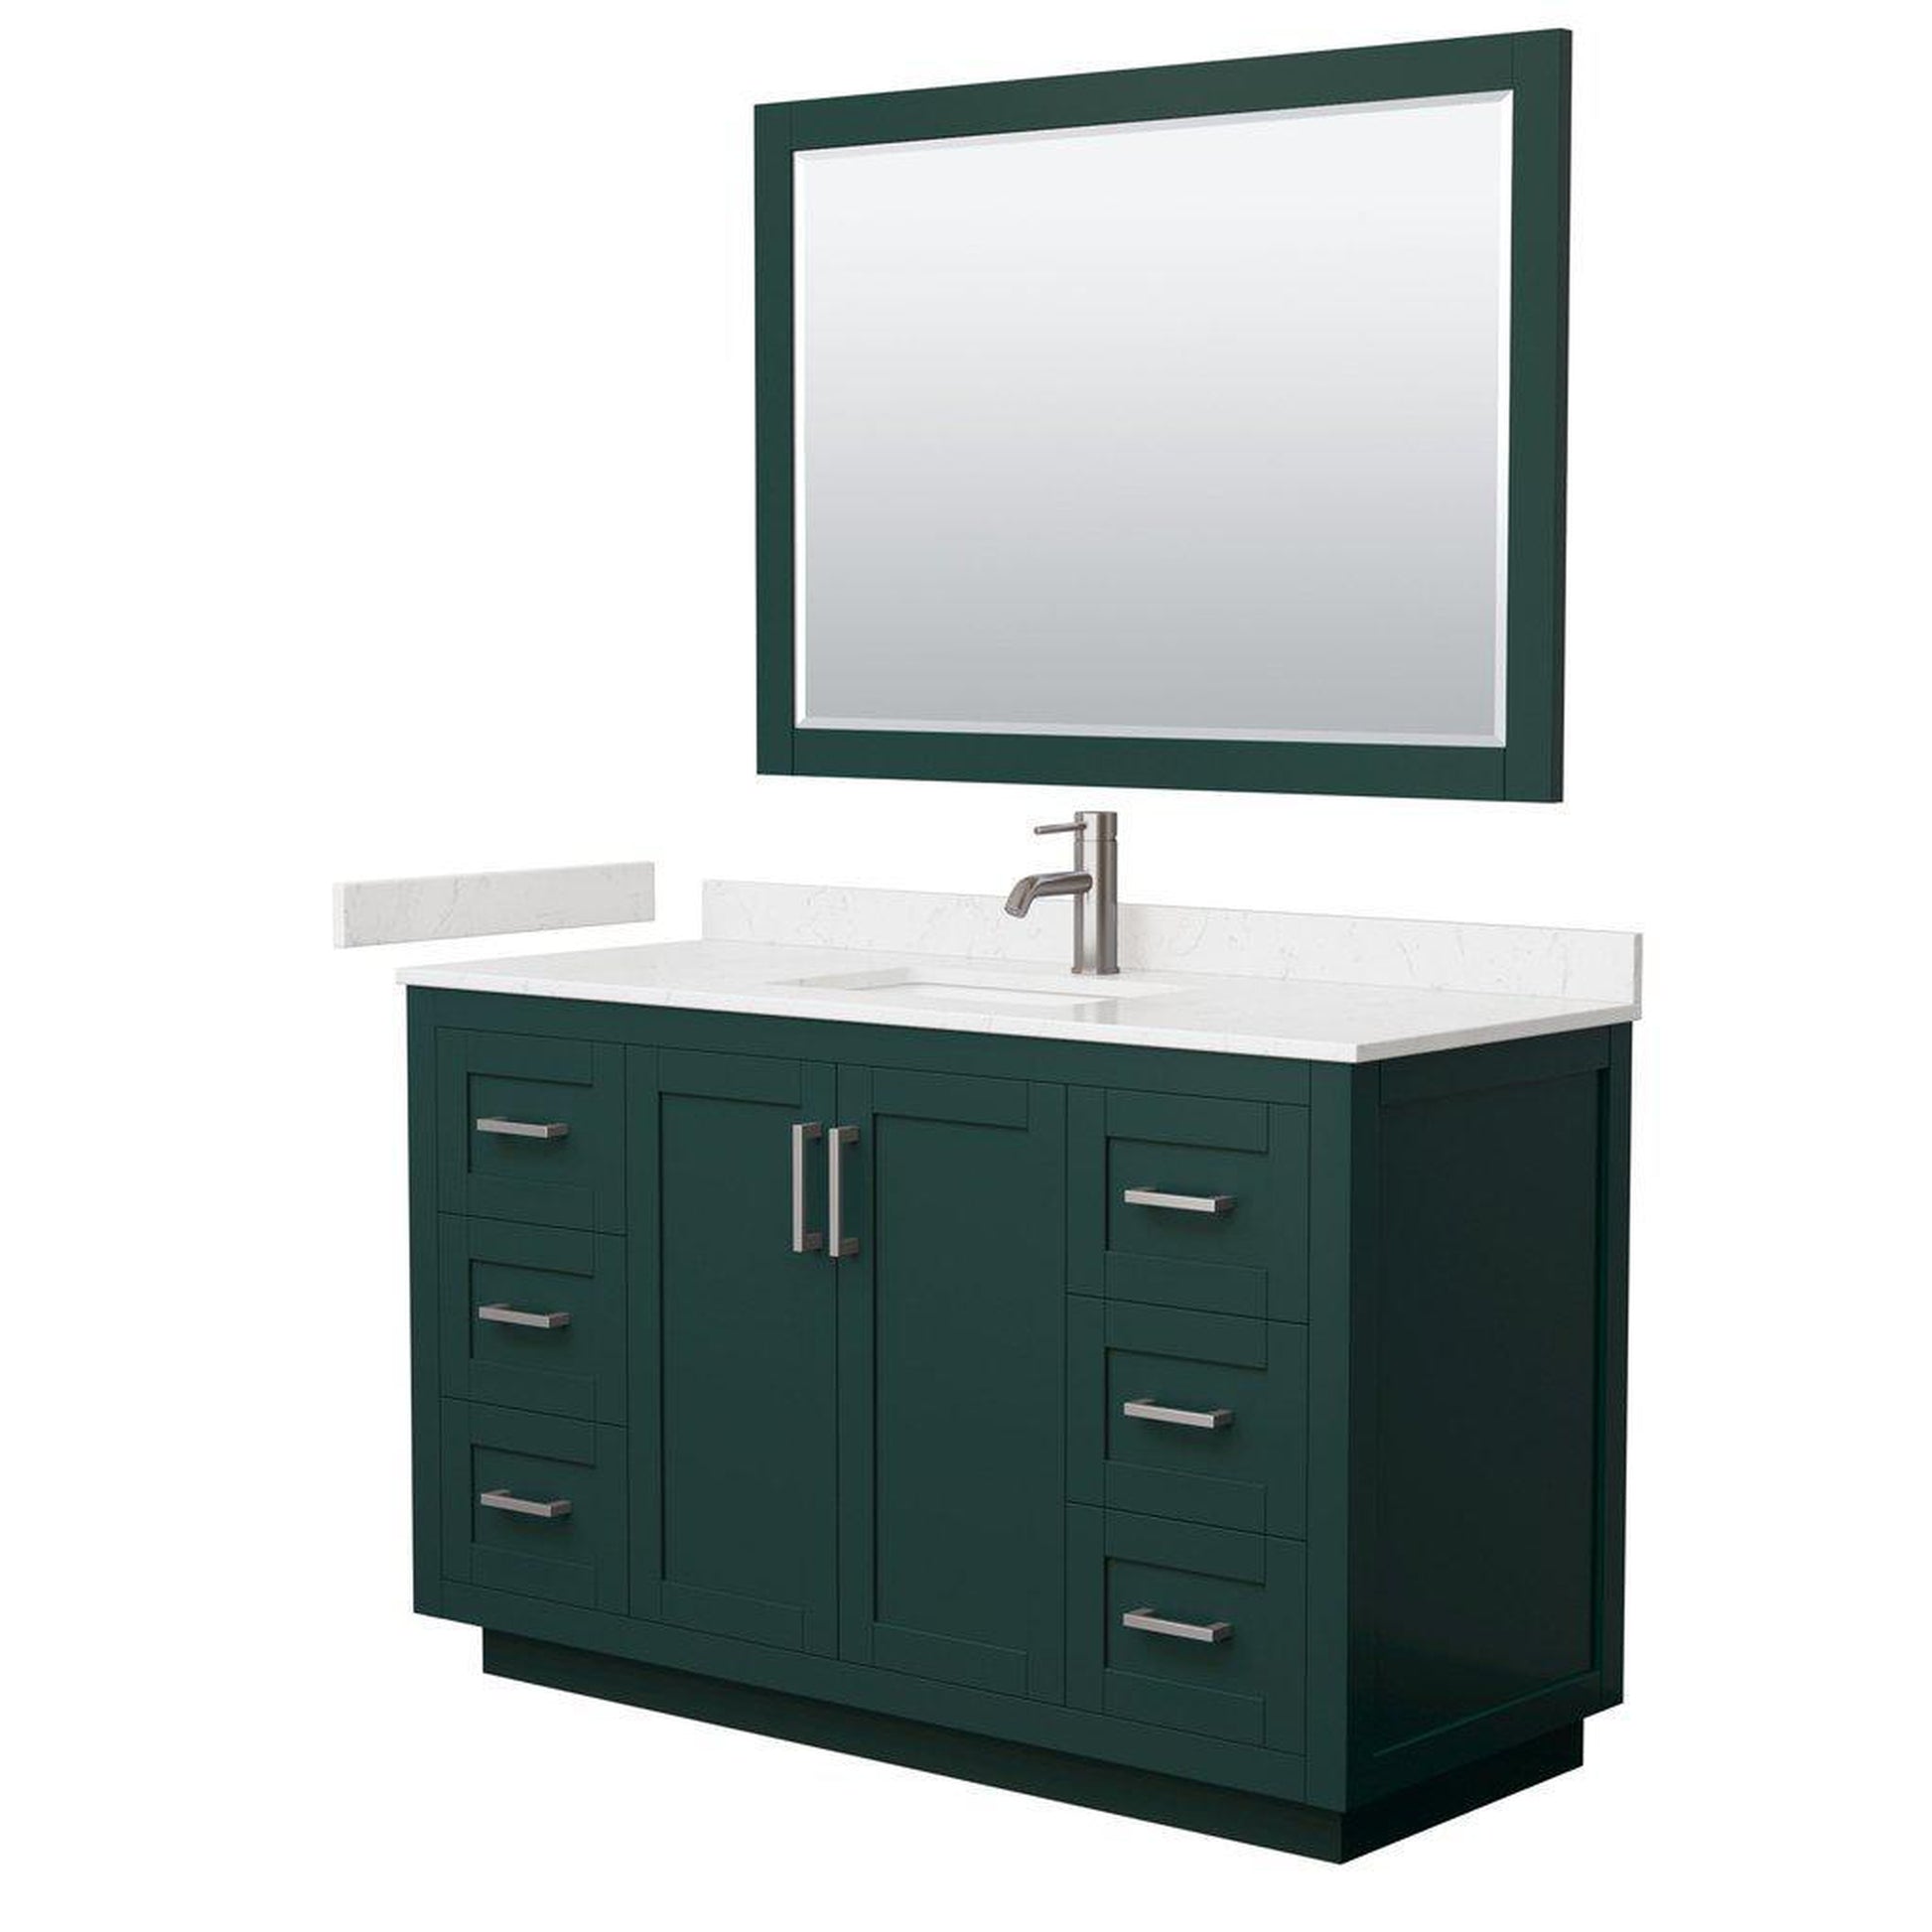 Wyndham Collection Miranda 54" Single Bathroom Green Vanity Set With Light-Vein Carrara Cultured Marble Countertop, Undermount Square Sink, 46" Mirror And Brushed Nickel Trim